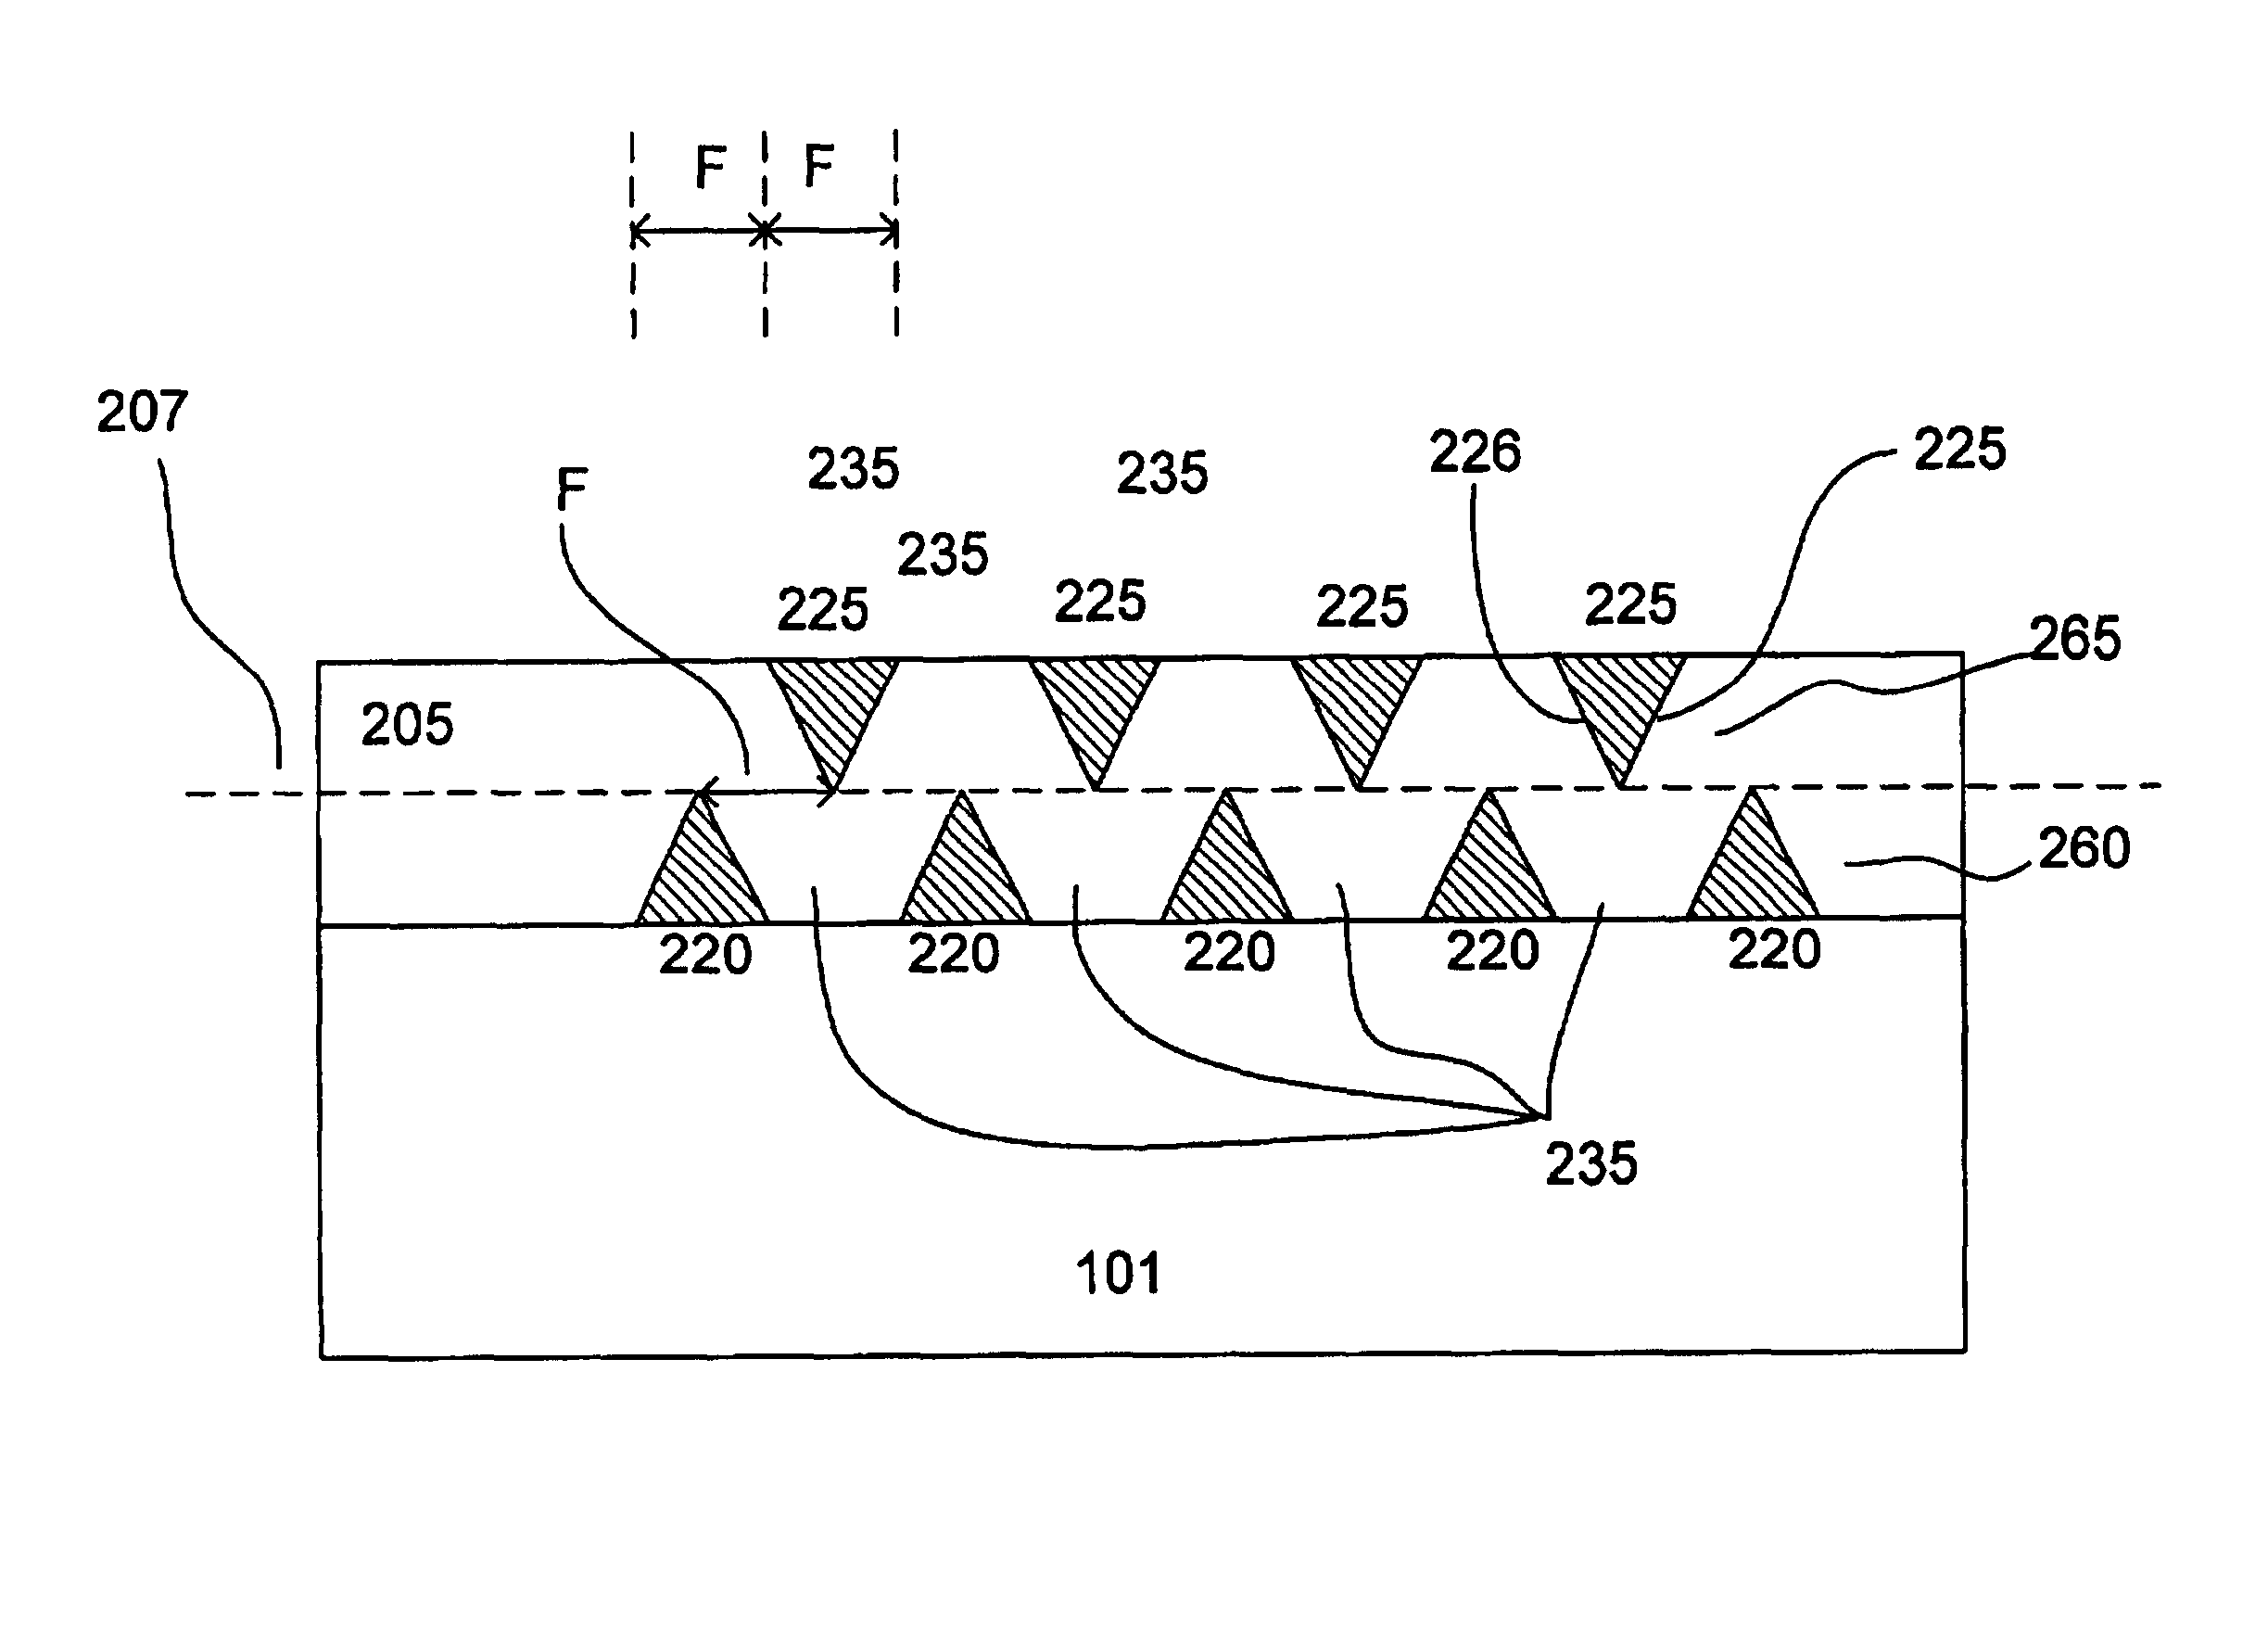 Multi-level conductive lines with reduced pitch